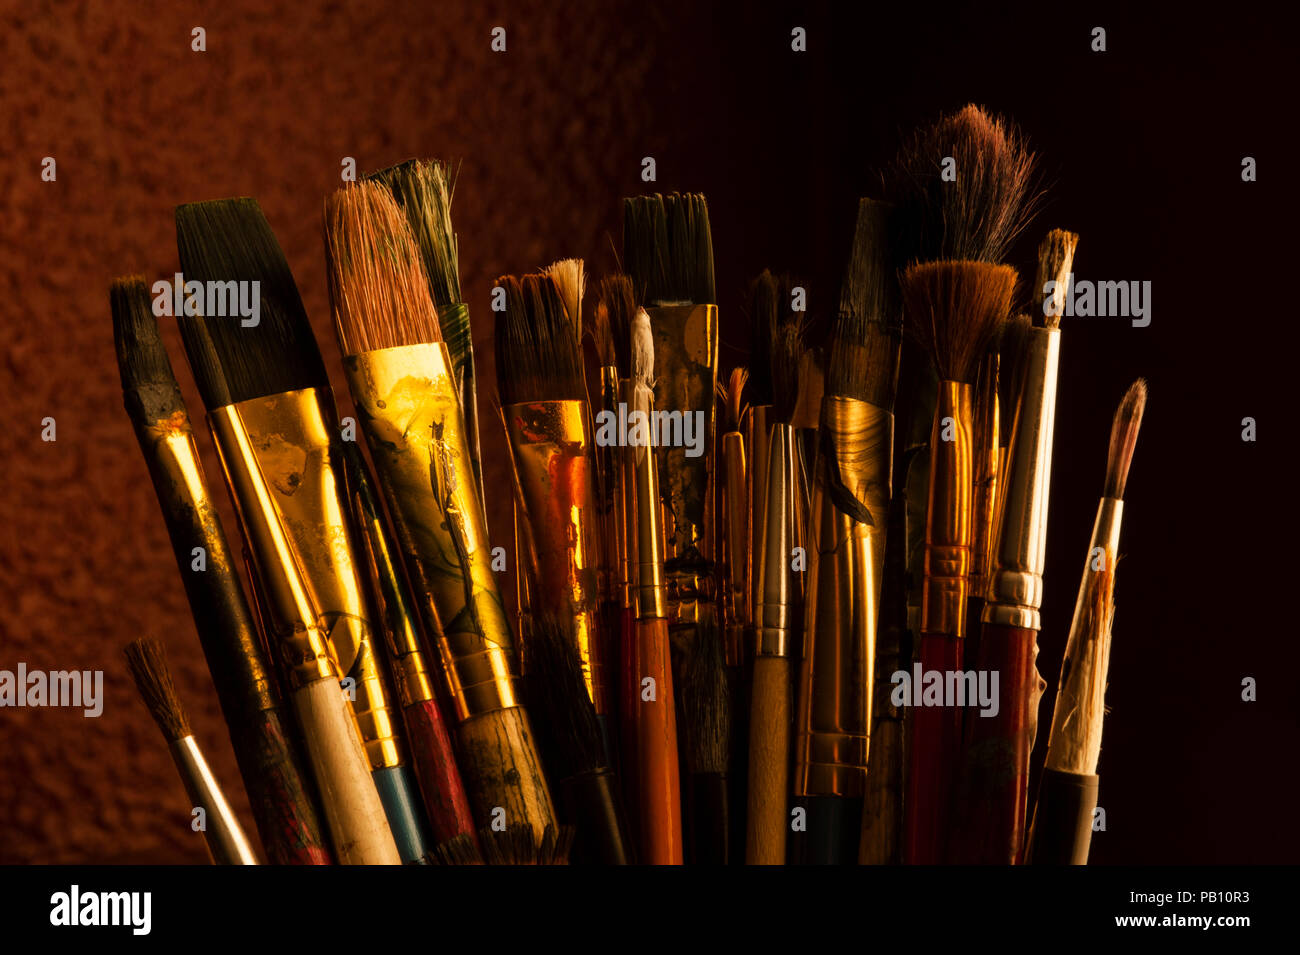 Paint brushes, still life with warm light. Stock Photo